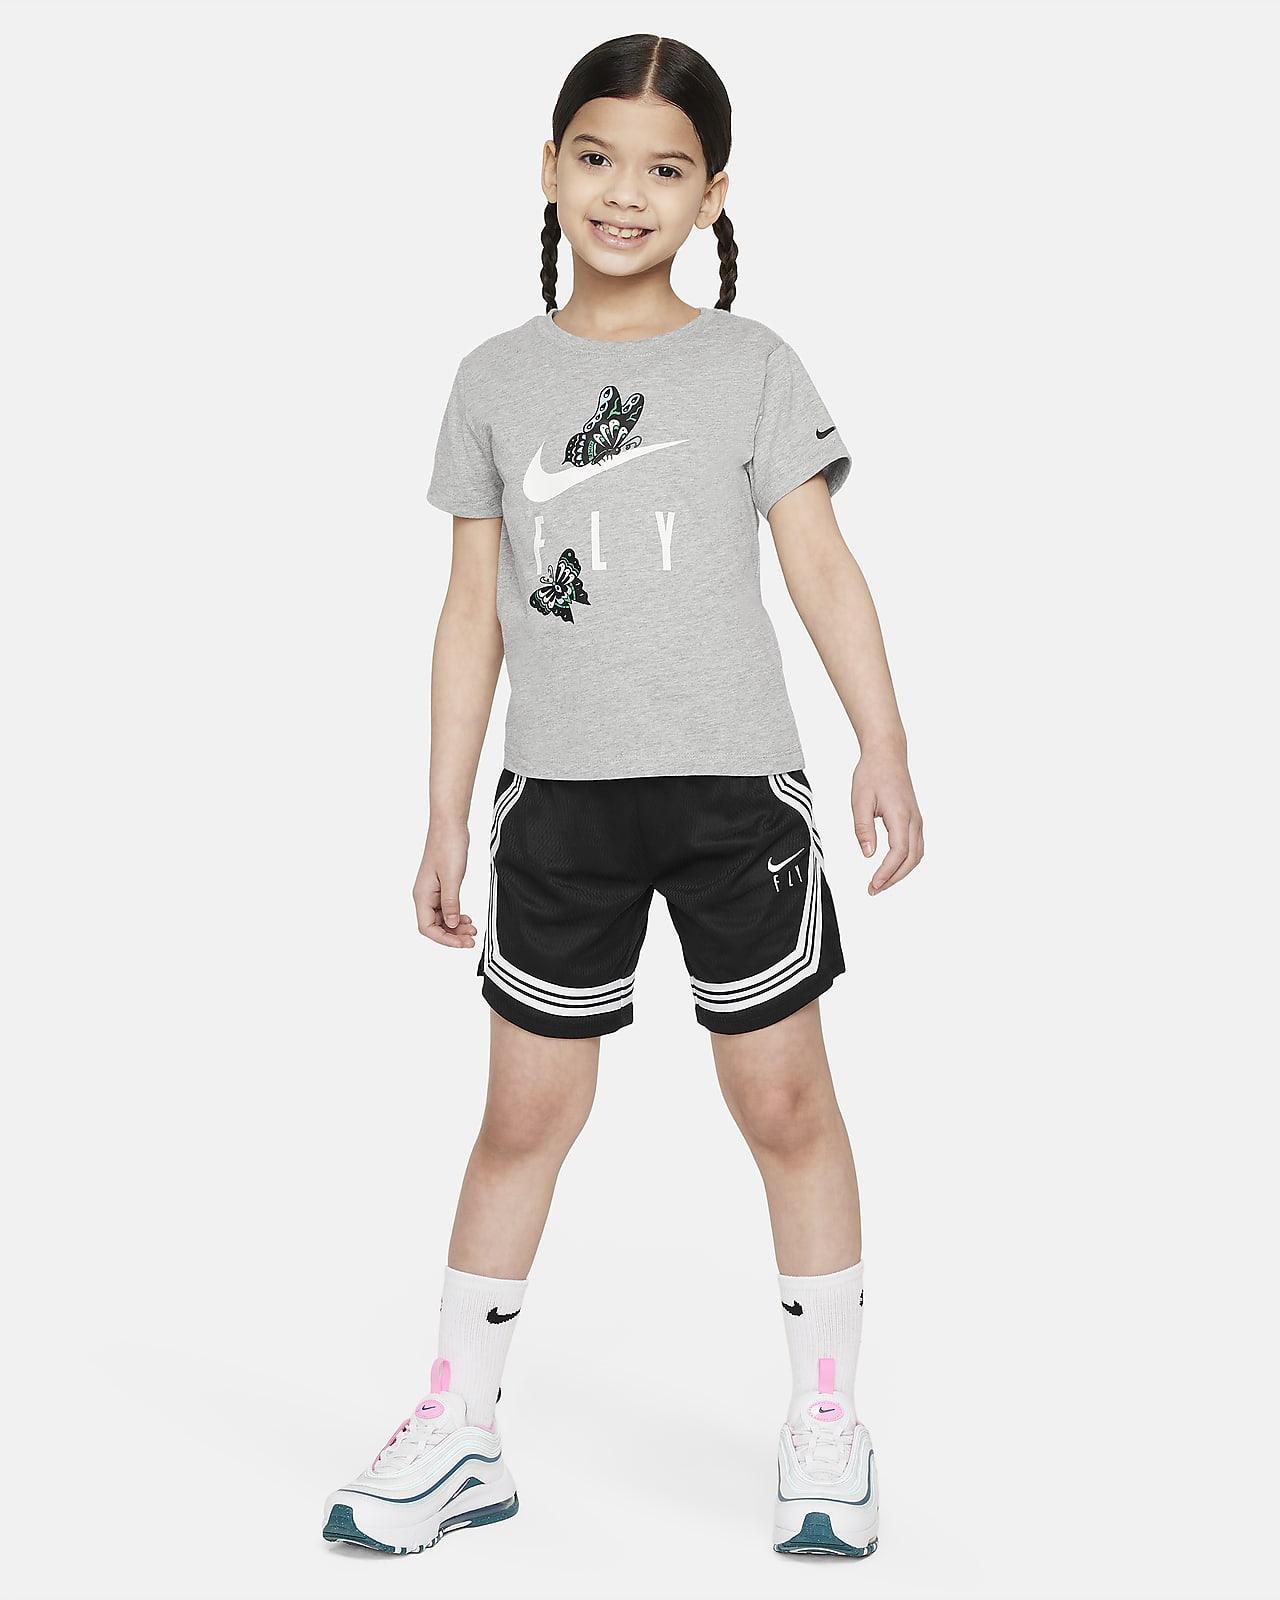 Nike Dry-FIT Fly Crossover Little Kids' 2-Piece T-Shirt Set